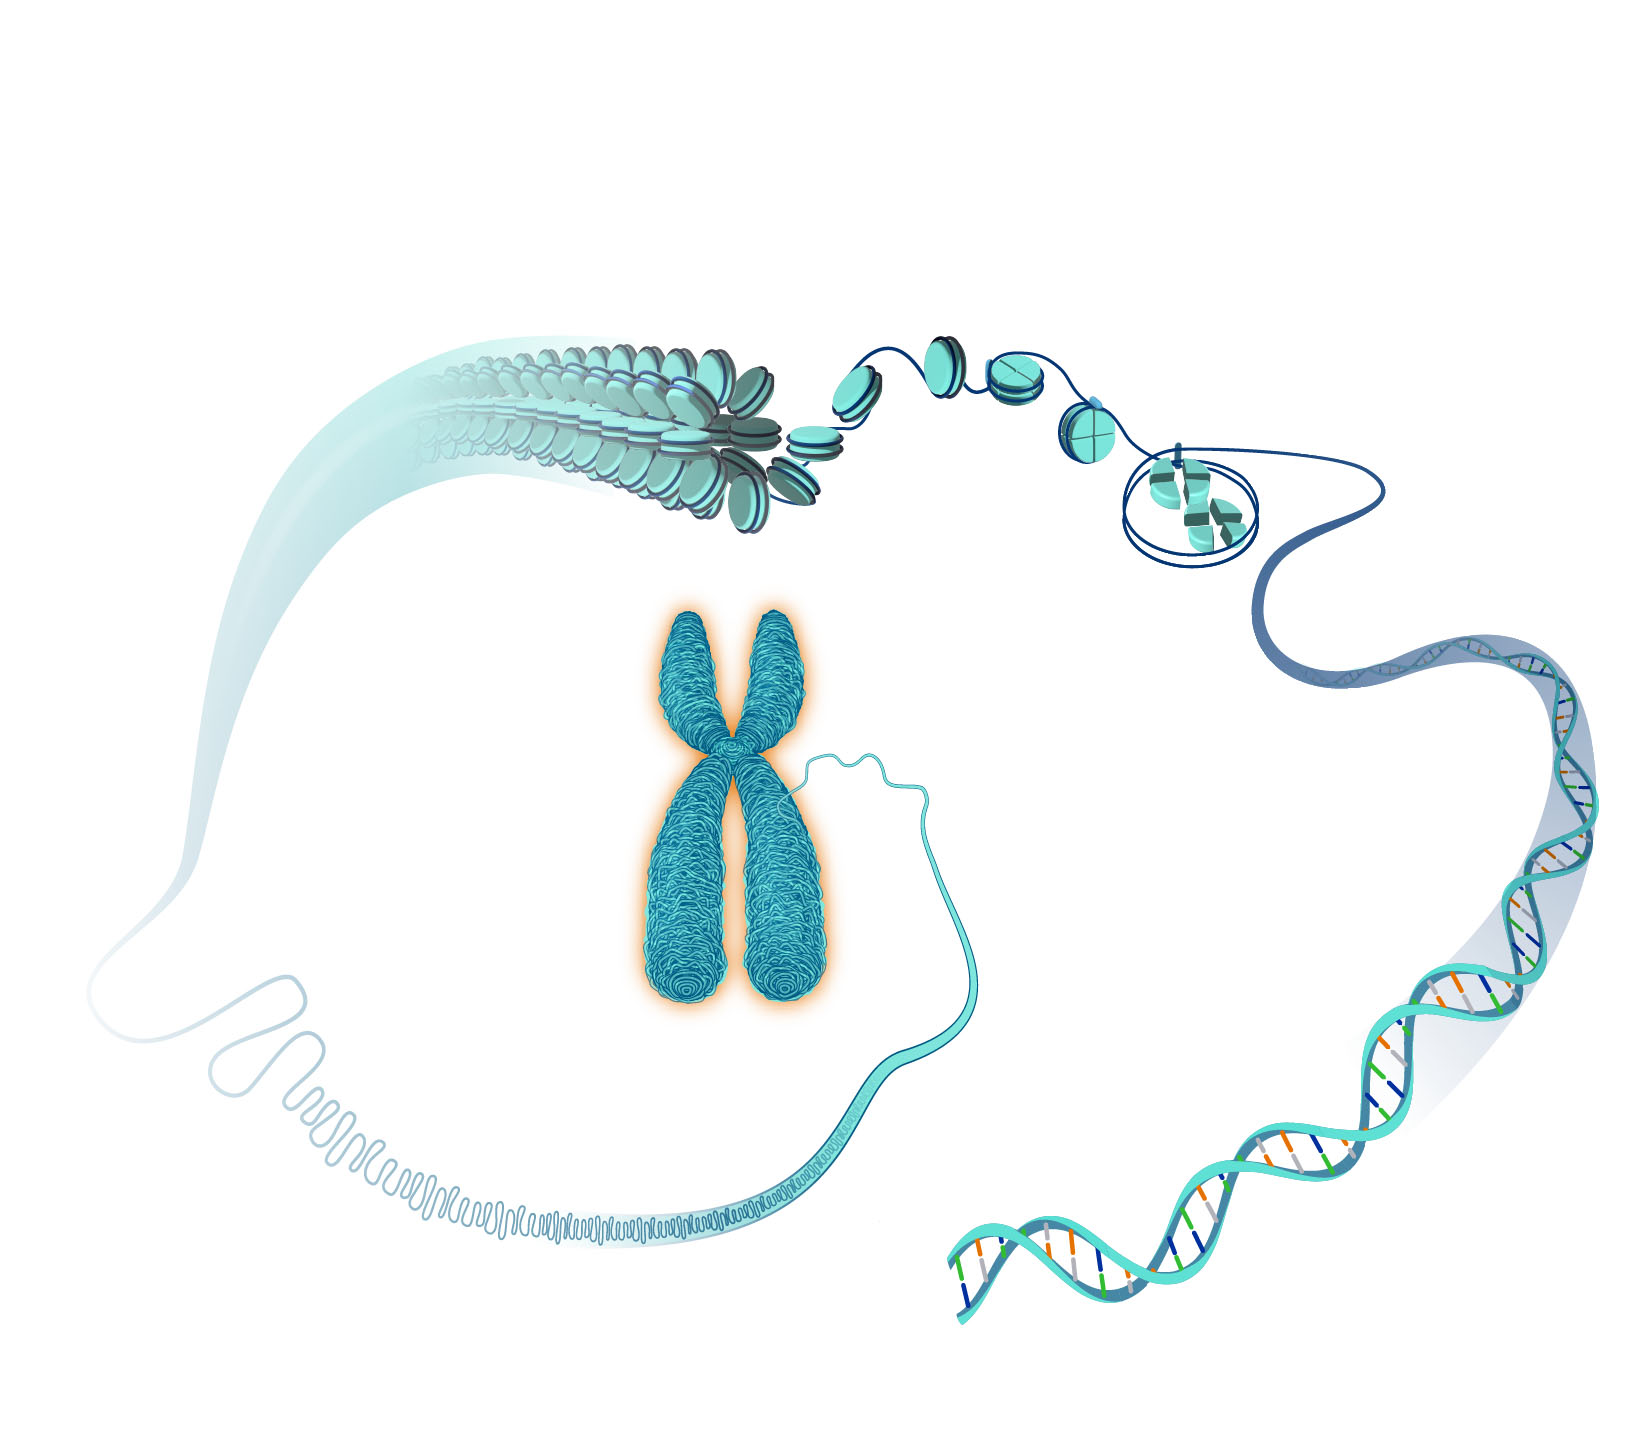 This illustration shows the structure of a chromosome, highlighting how DNA is tightly packed around disc-shaped proteins to form the characteristic X-shaped figure seen during cell division.